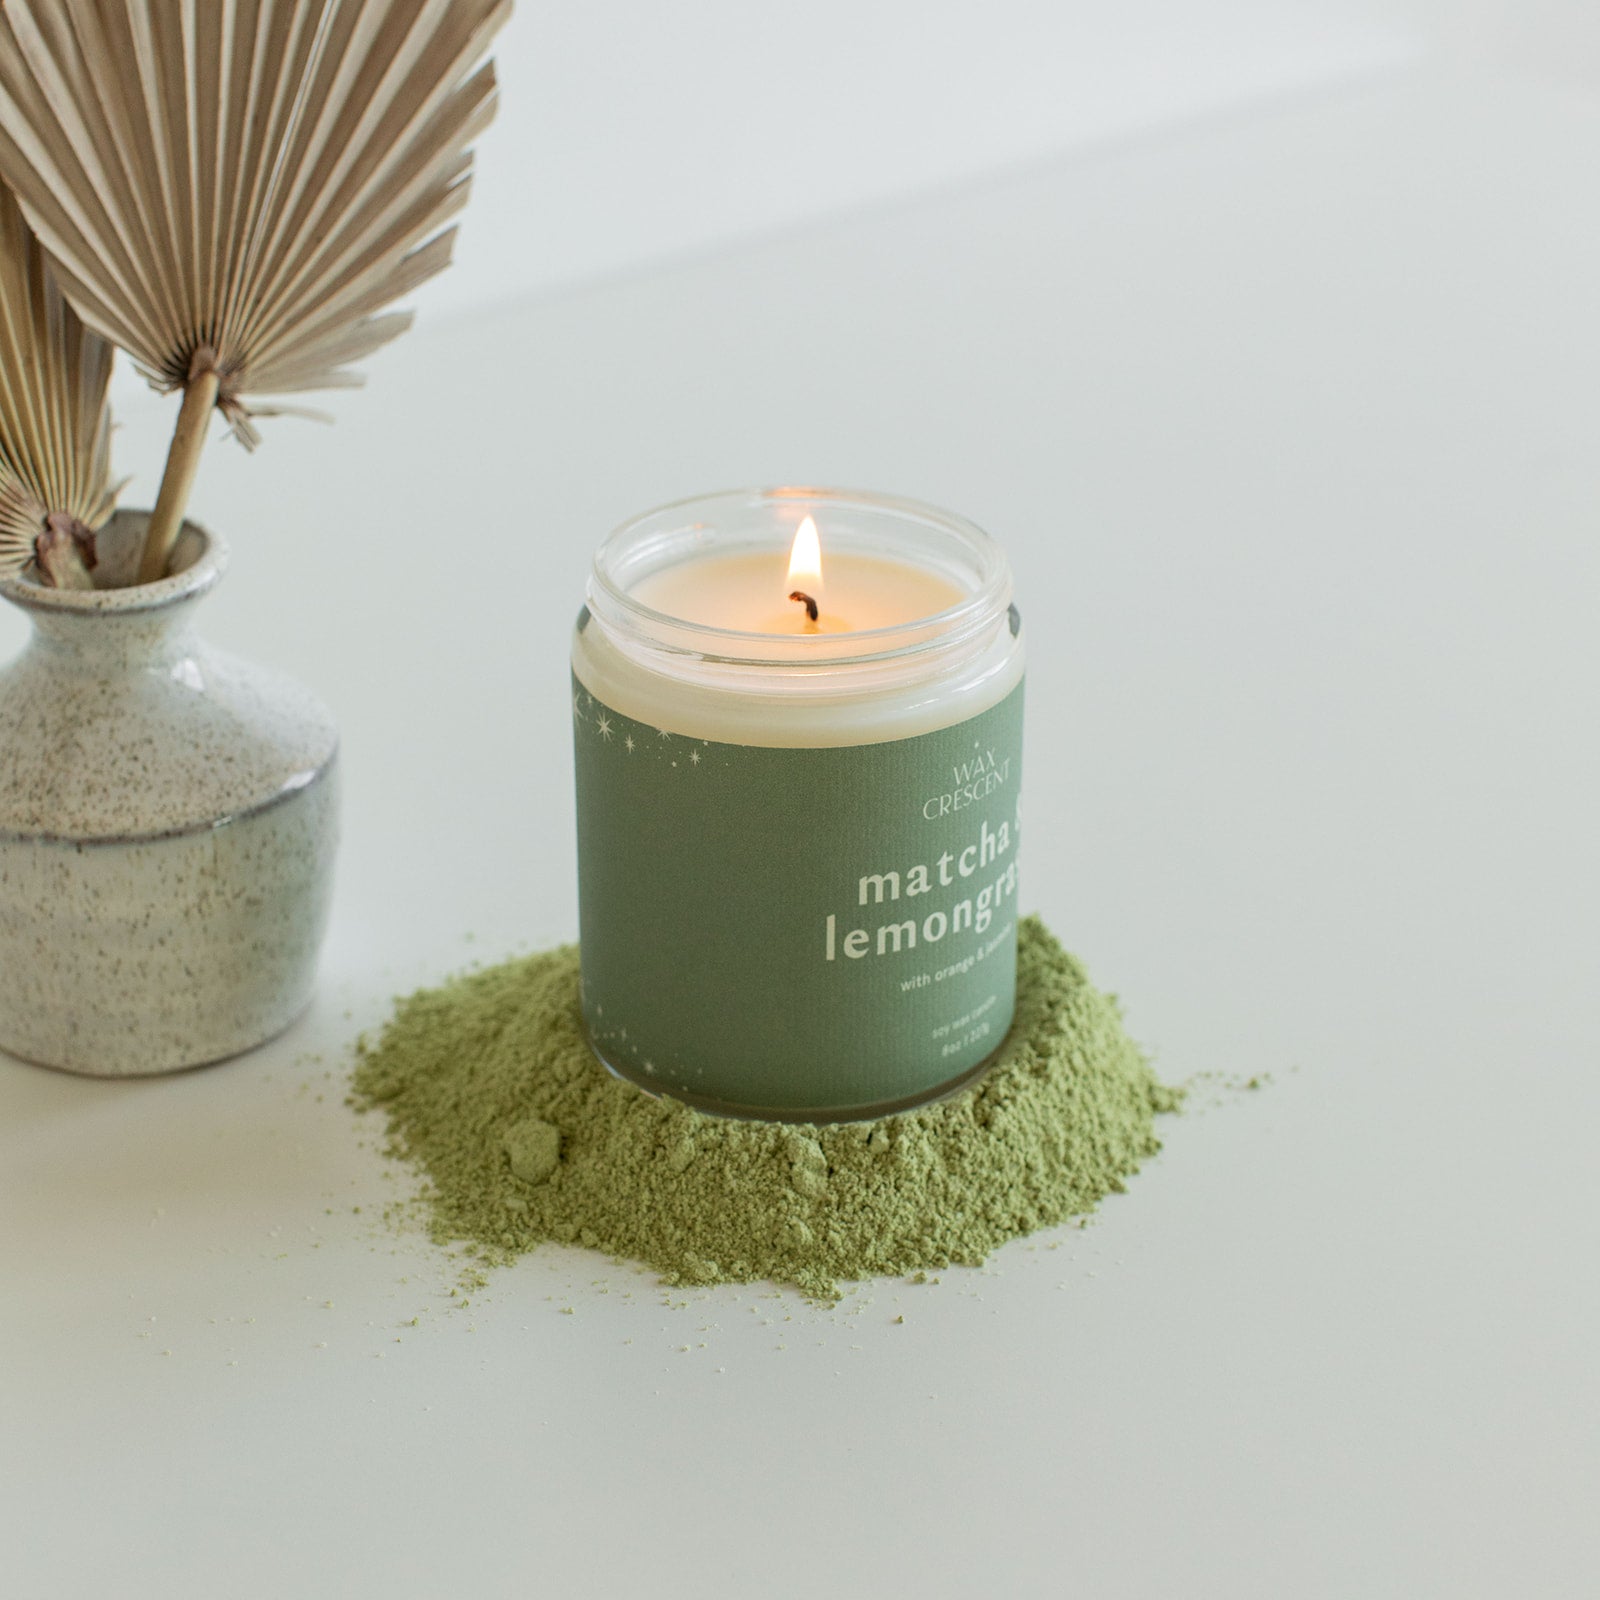 Matcha and Lemongrass soy wax candle hand-poured by Wax Crescent in Longmont, Colorado just outside of Denver. Made with non toxic fragrance oils and natural essential oils for at home luxury. 